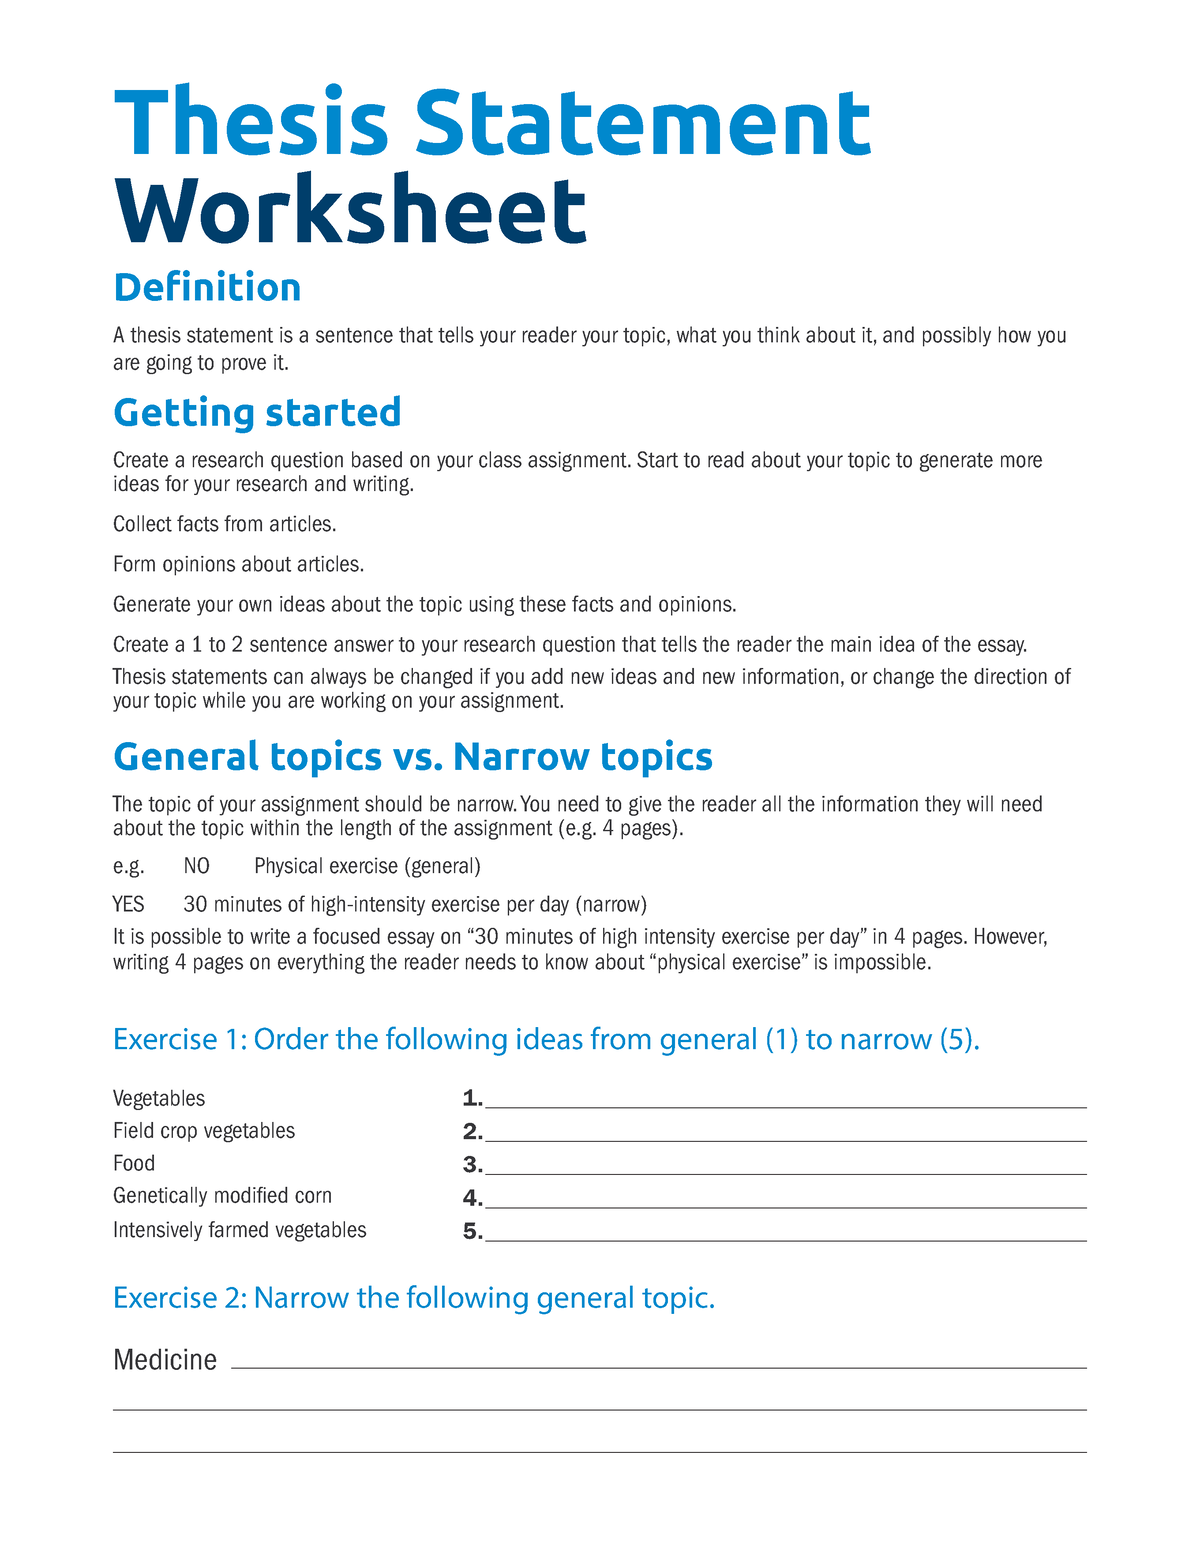 Thesis-statement-worksheet - Thesis Statement Worksheet A thesis ...